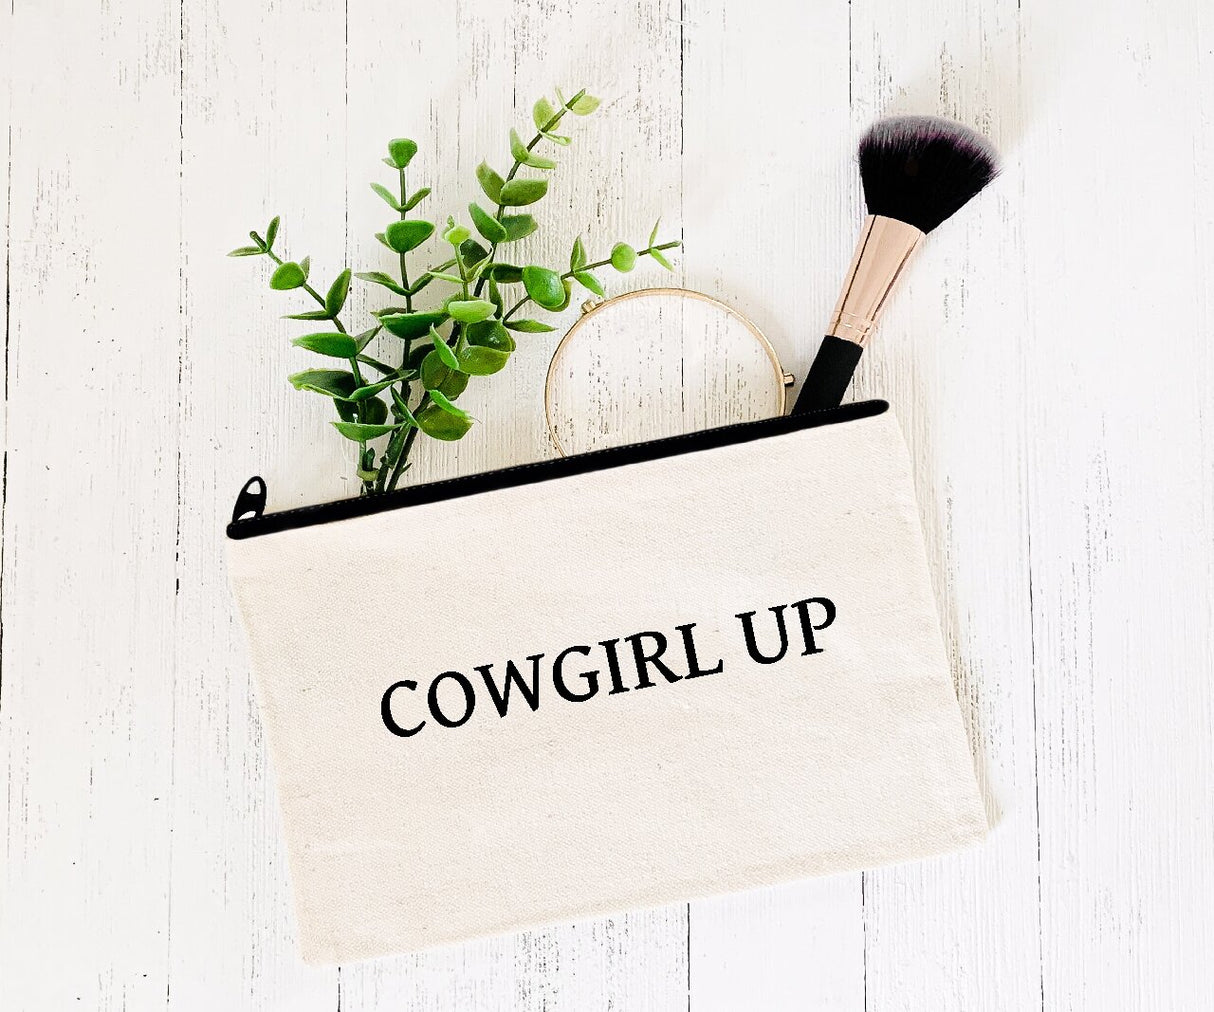 CowGirl Up - Zipper Bags for Cosmetics, Pencils or Show Cash